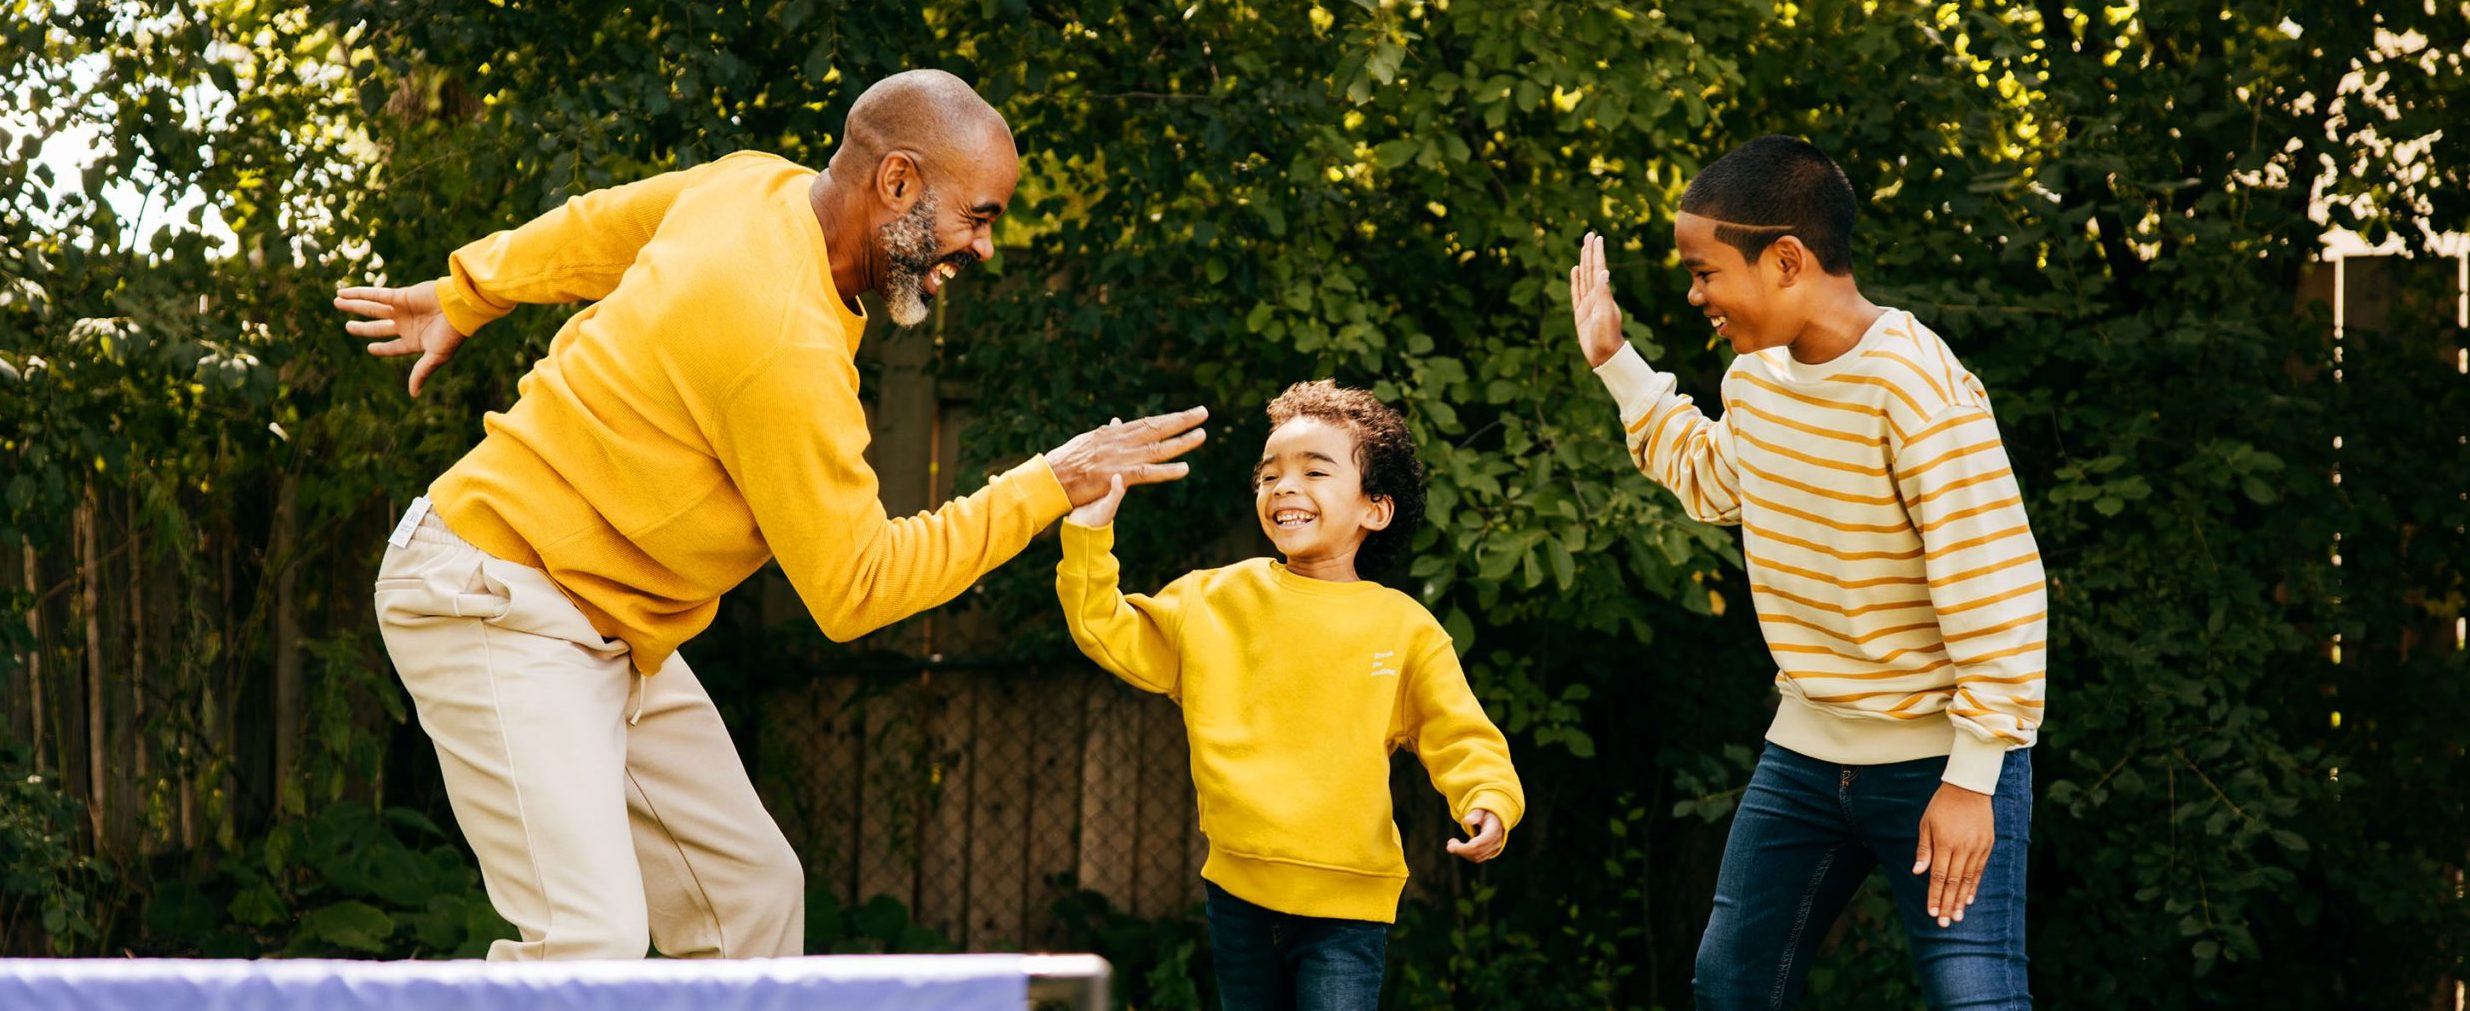 A man smiles while high-fiving two boys in a backyard, with trees in the background.